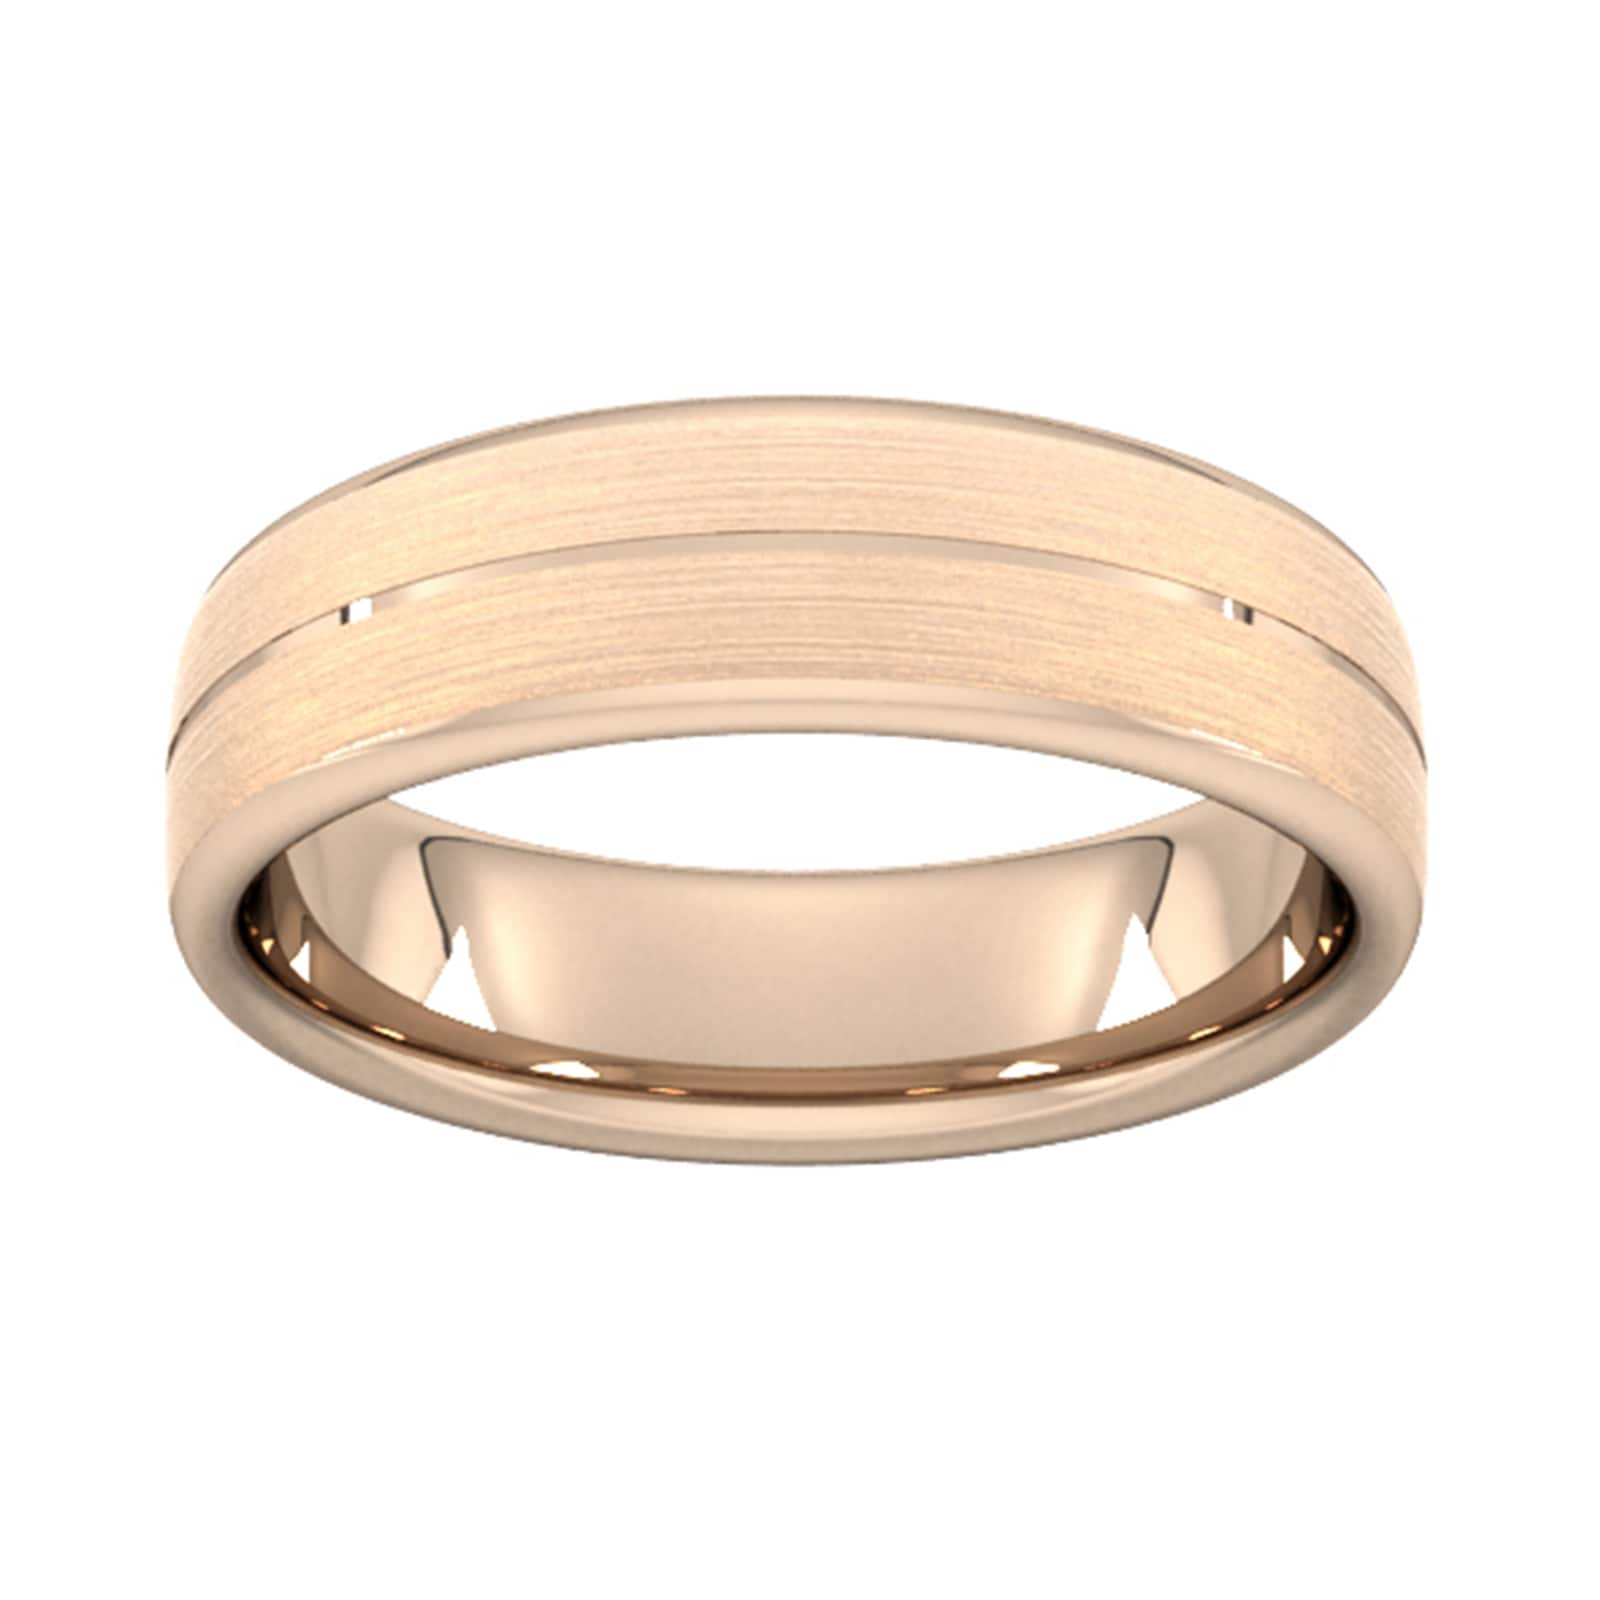 6mm Traditional Court Heavy Centre Groove With Chamfered Edge Wedding Ring In 18 Carat Rose Gold - Ring Size M